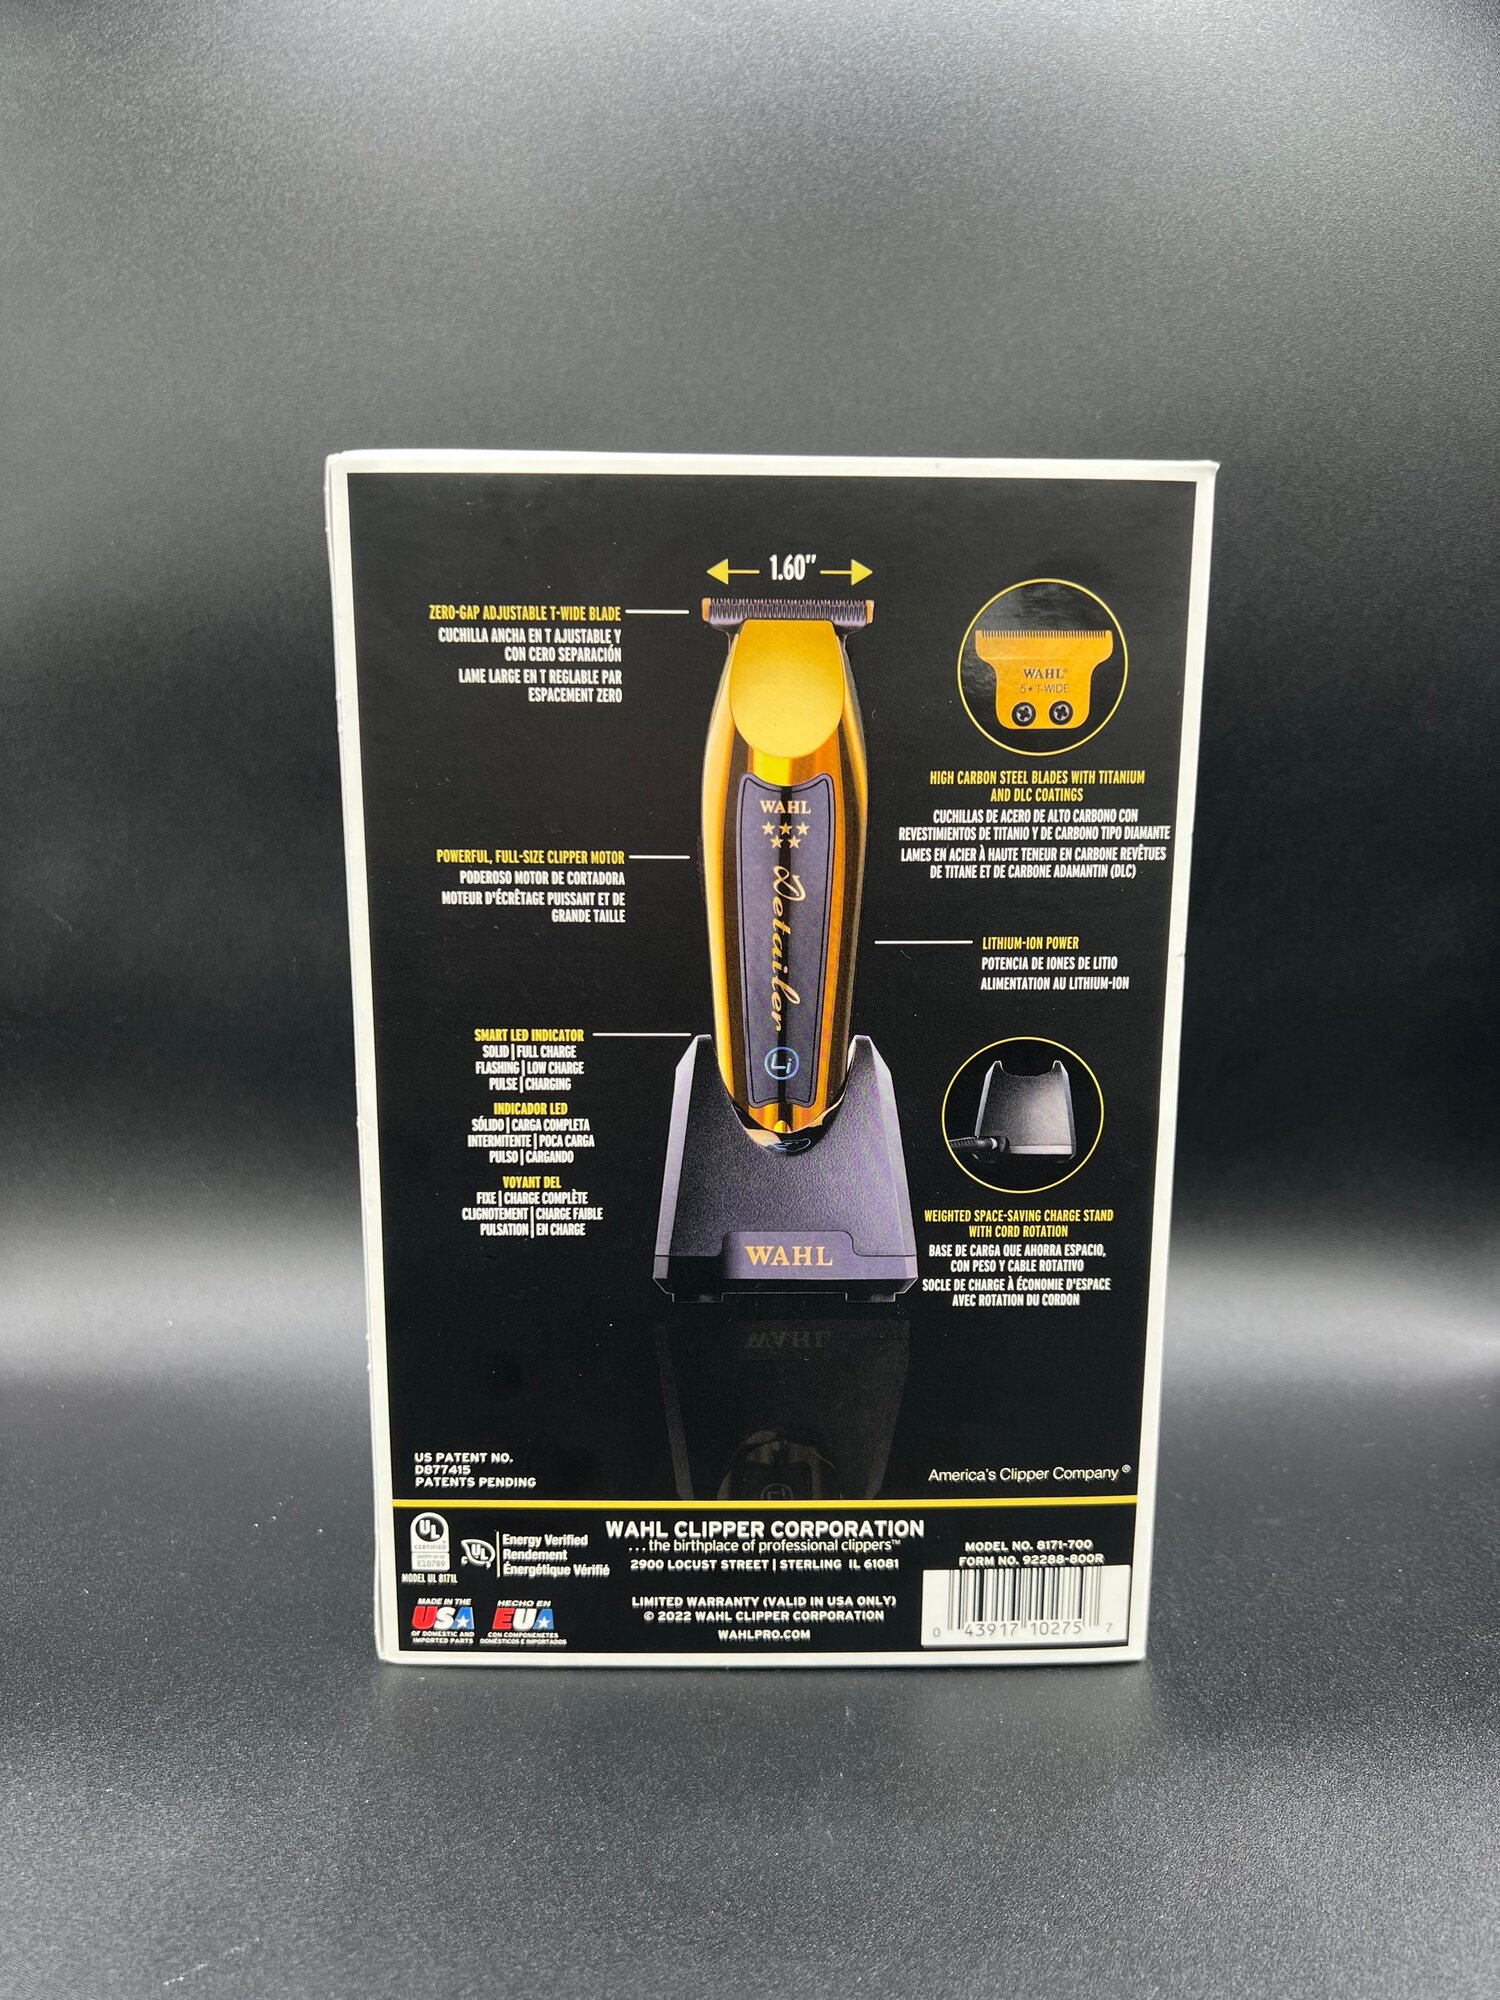 Wahl Detailer Trimmer, Trimmers & Clippers